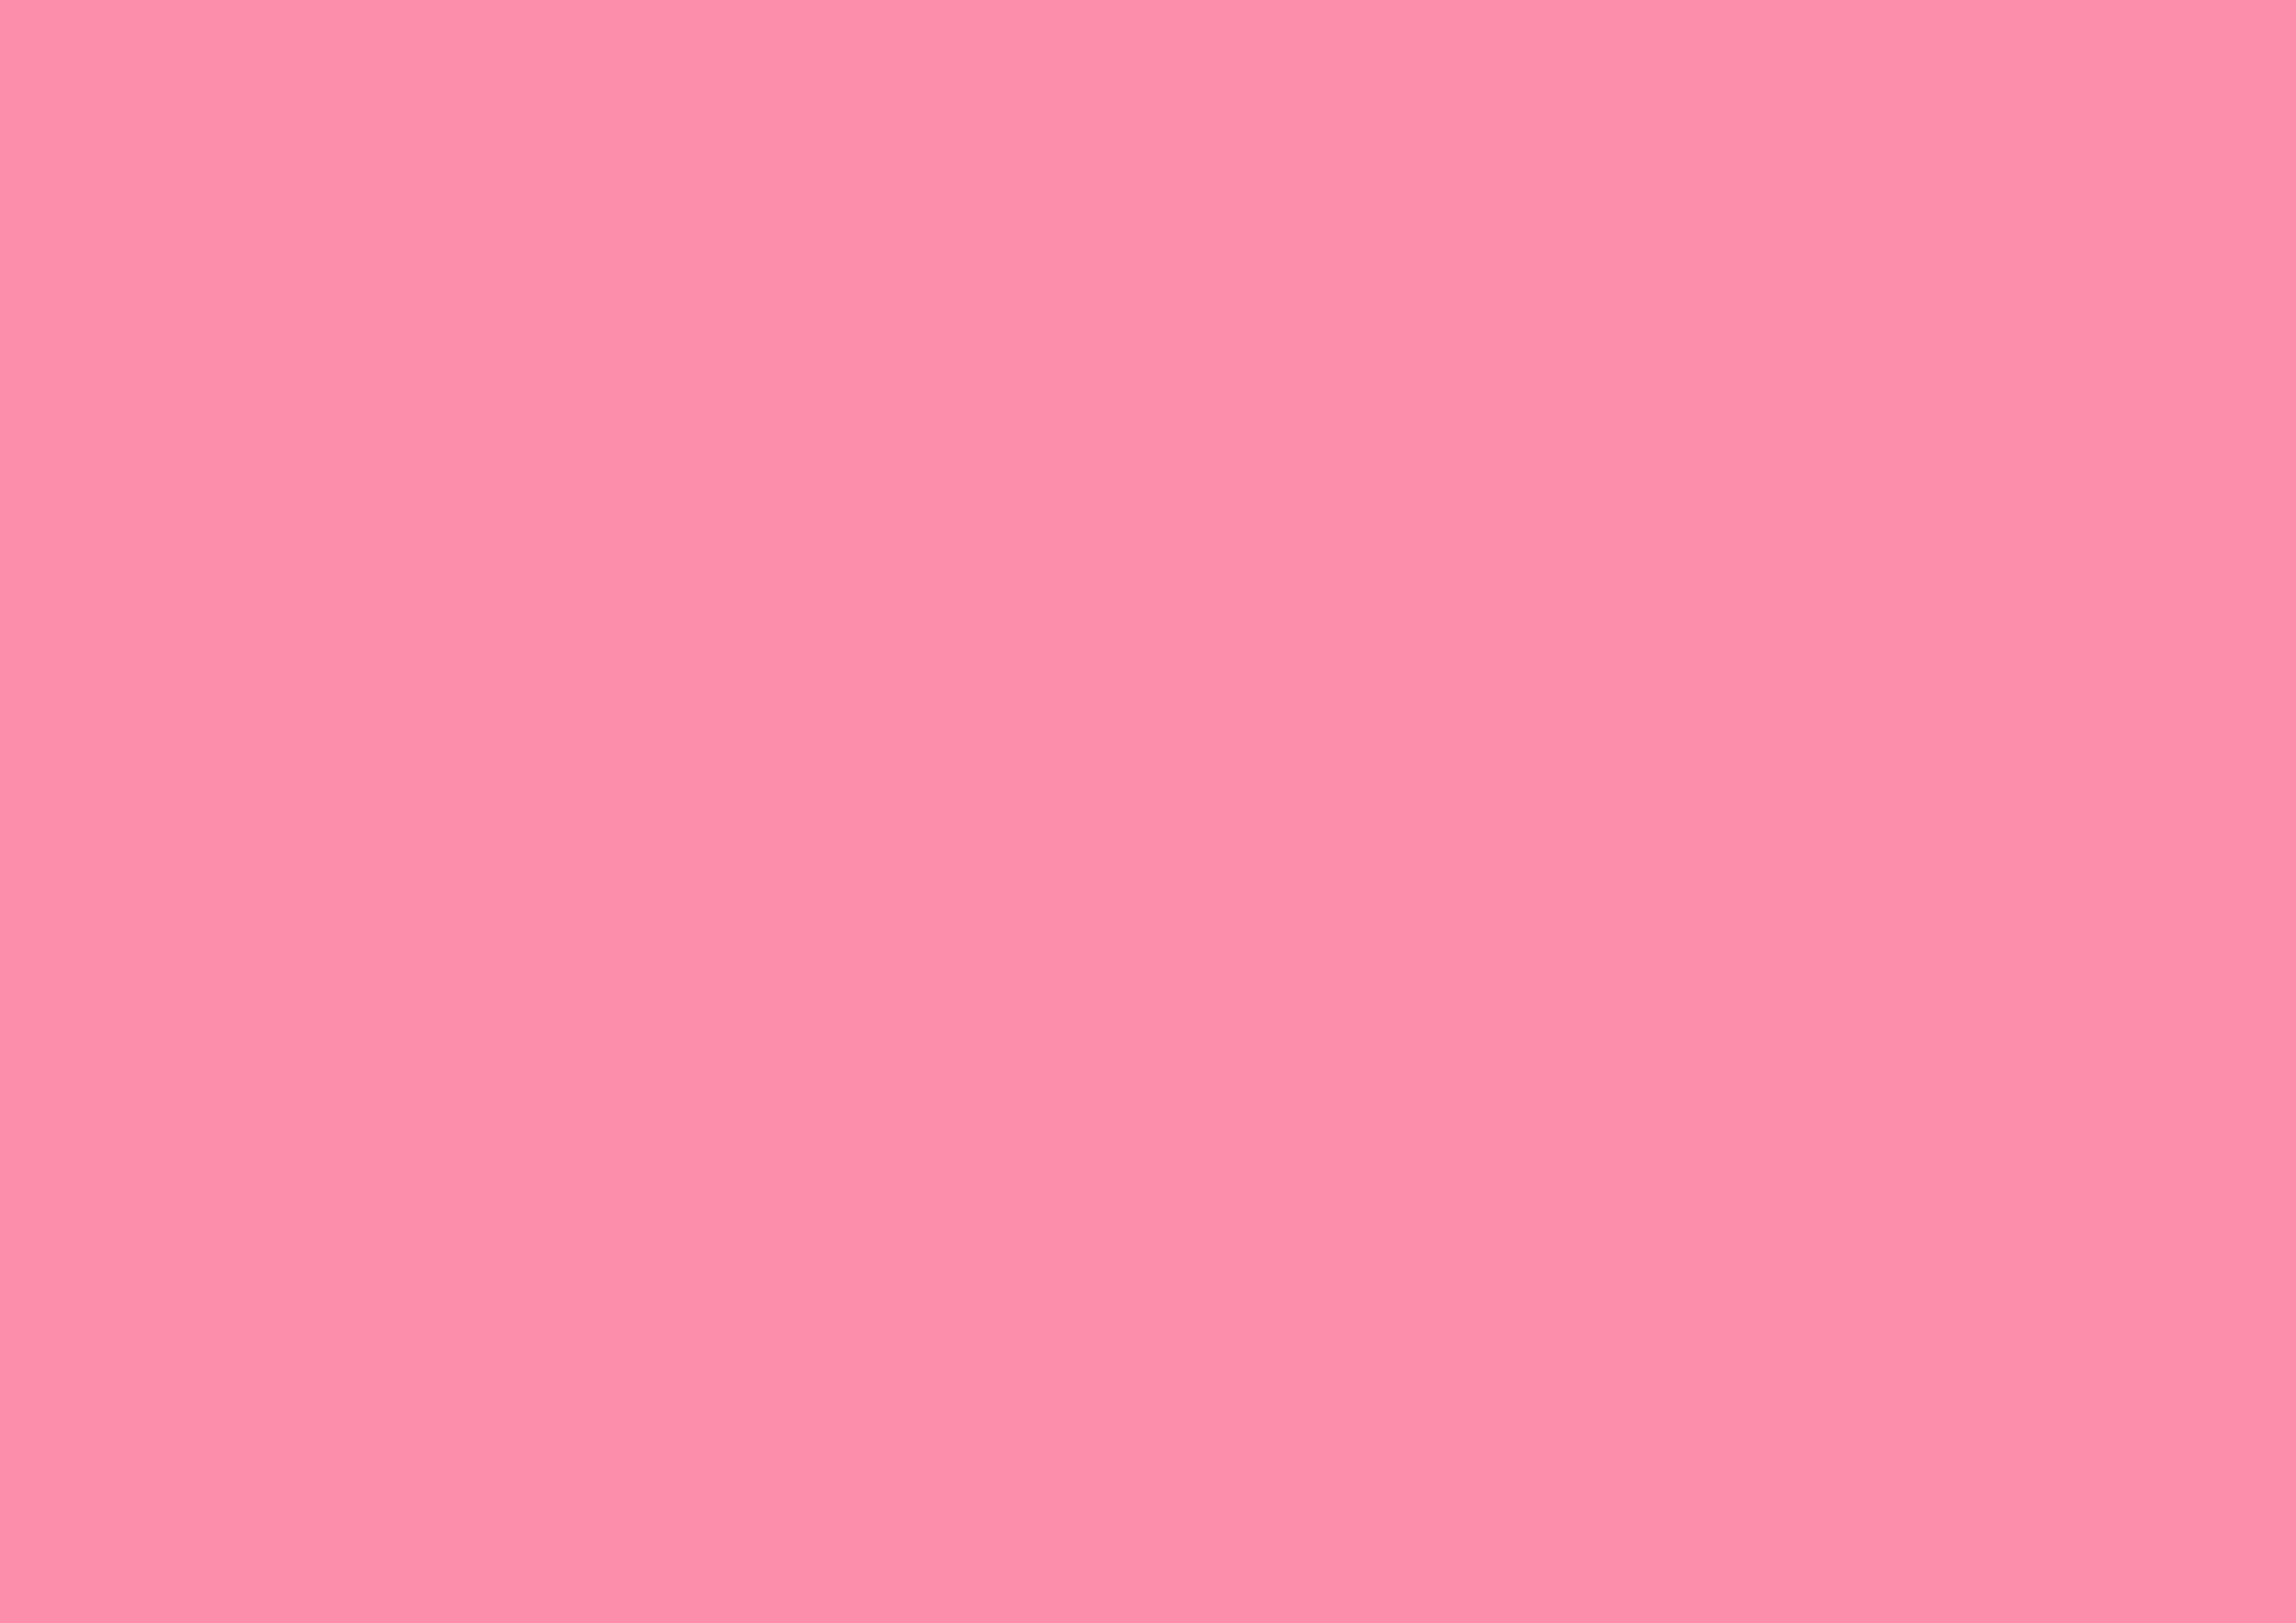 3508x2480 Flamingo Pink Solid Color Background